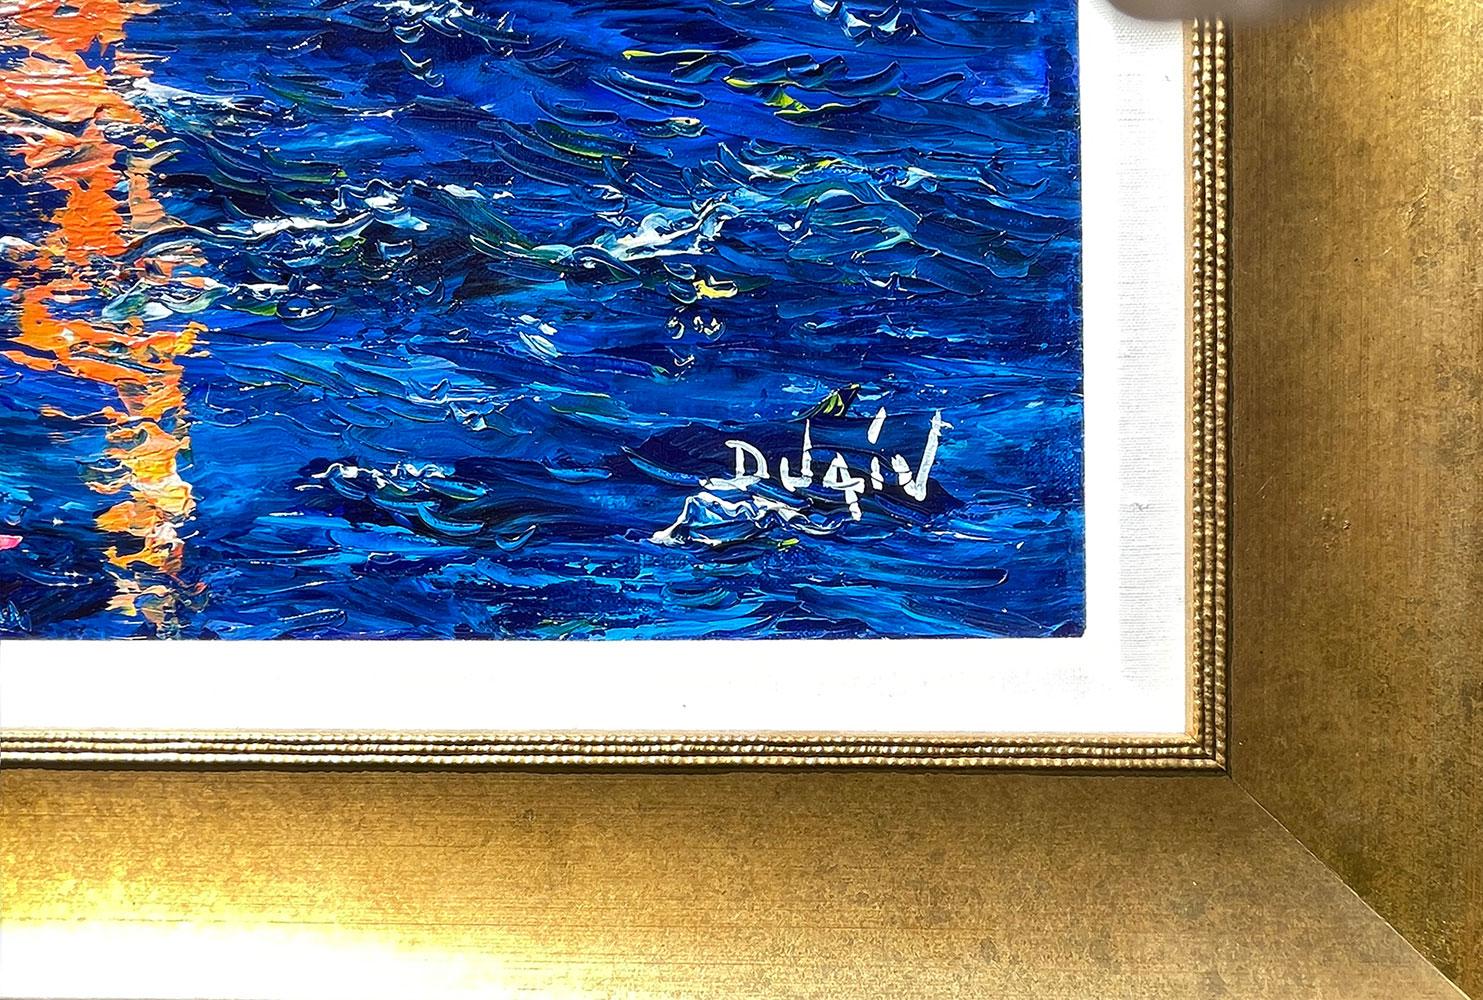 Artist: Duaiv
Title: Deep Blue Sky
Medium: Original Oil on Linen
Signature: Hand-signed by the Artist
Size: Approximately 21x25 inches
Framed: Frame Size 29x33 inches
Biography: Duaiv creates paintings that transcend the boundaries of expressionism